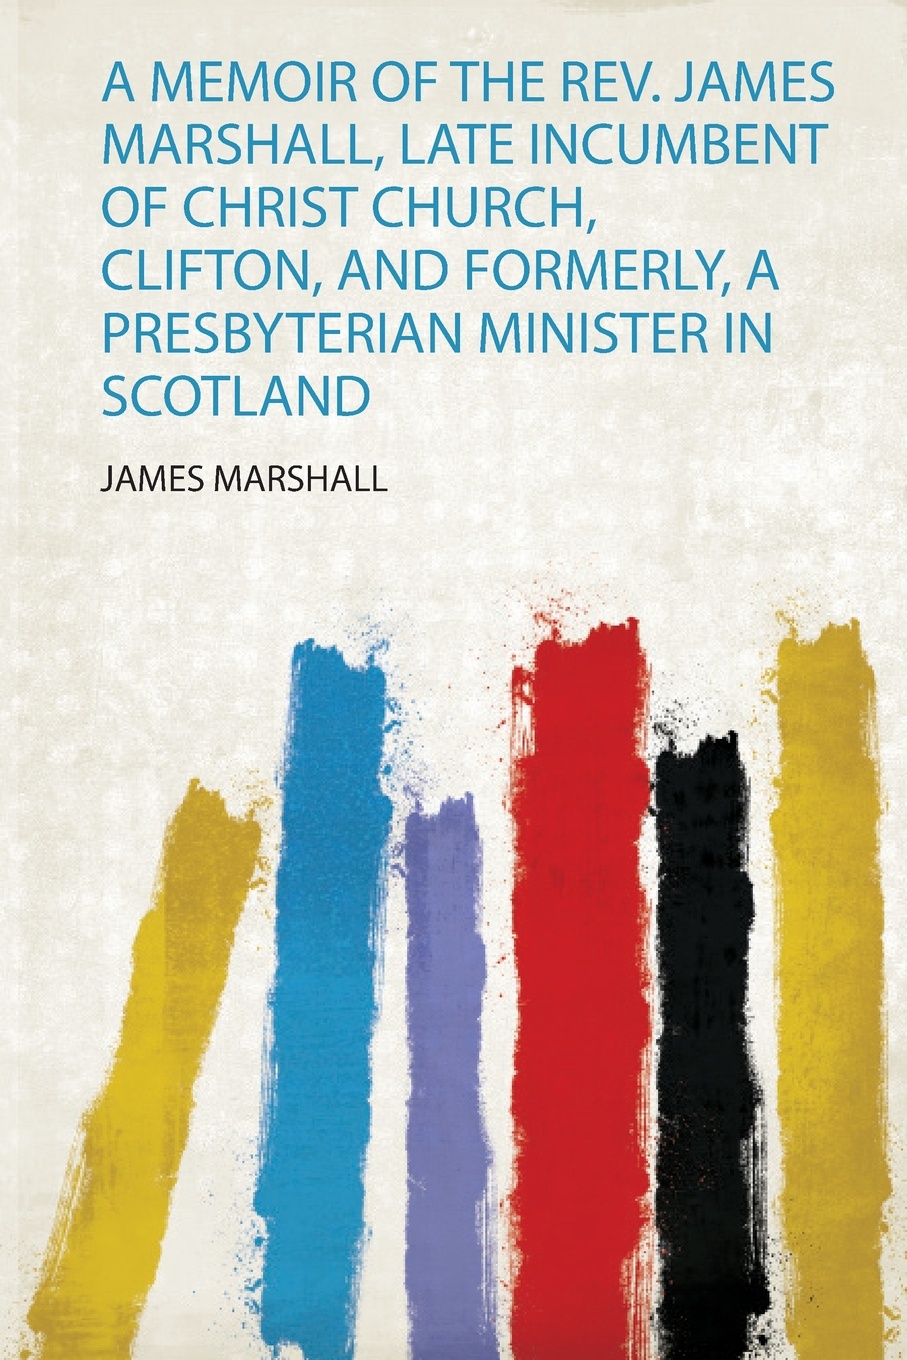 A Memoir of the Rev. James Marshall, Late Incumbent of Christ Church, Clifton, and Formerly, a Presbyterian Minister in Scotland